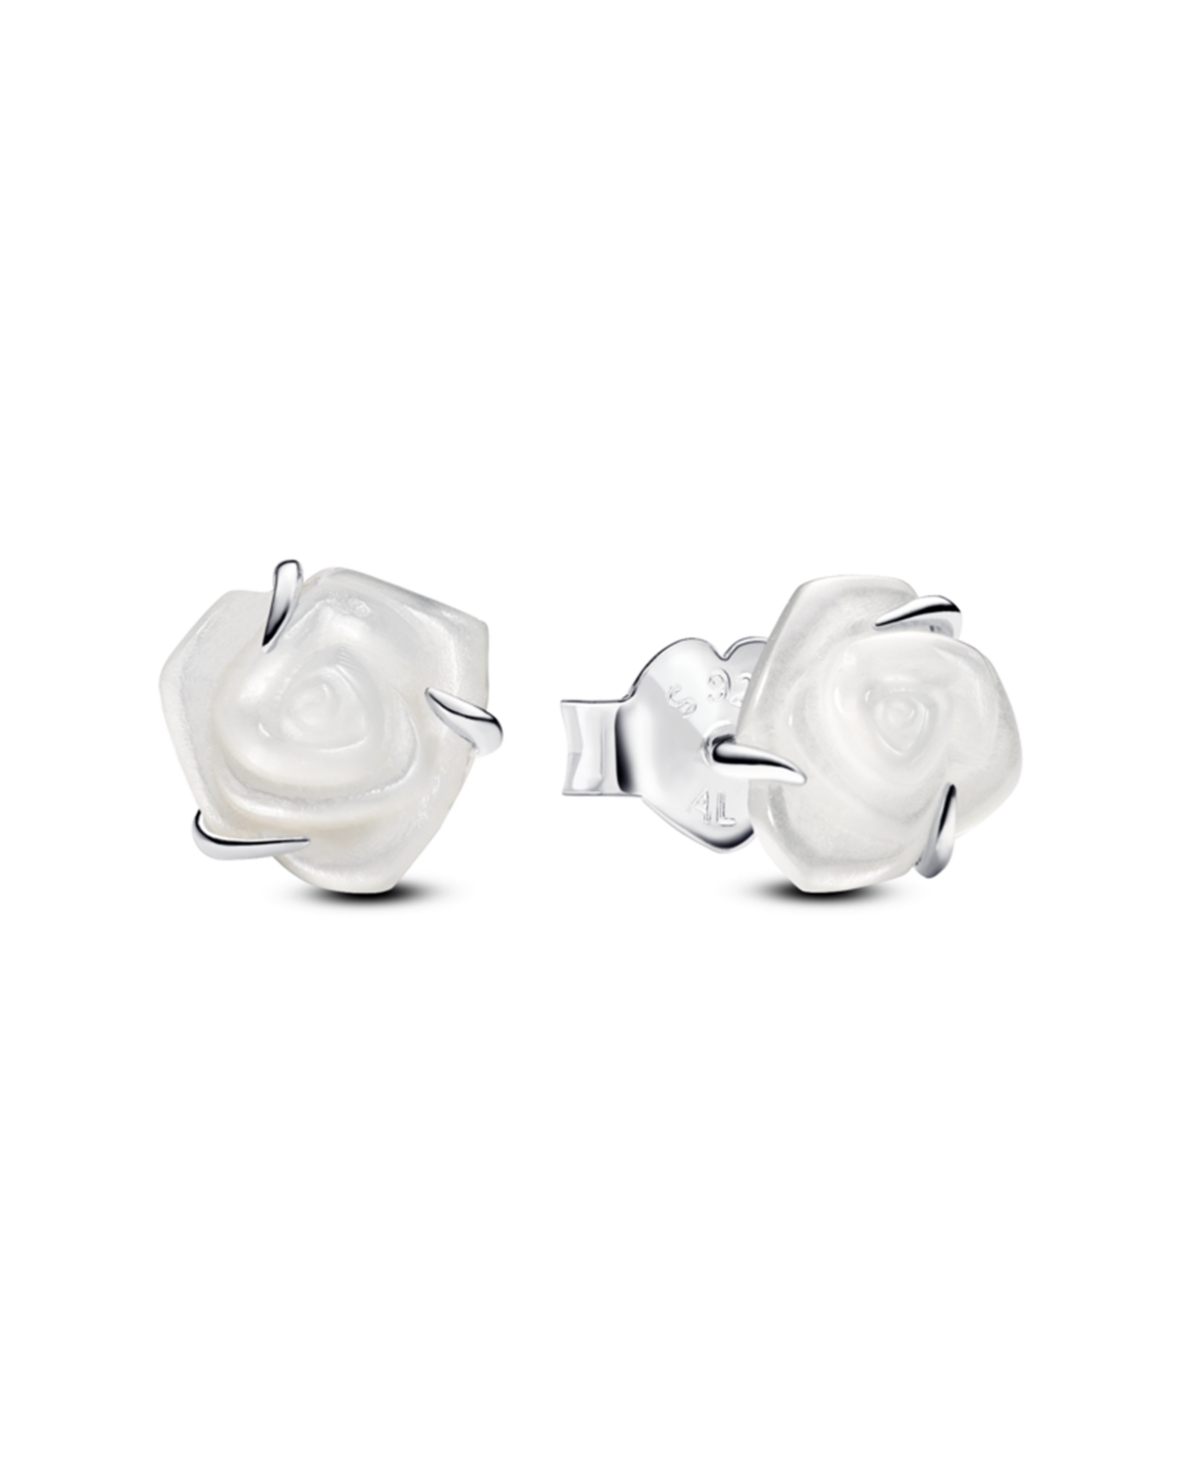 Man-Made Mother of Pearl White Rose Bloom Stud Earrings in Sterling Silver - White